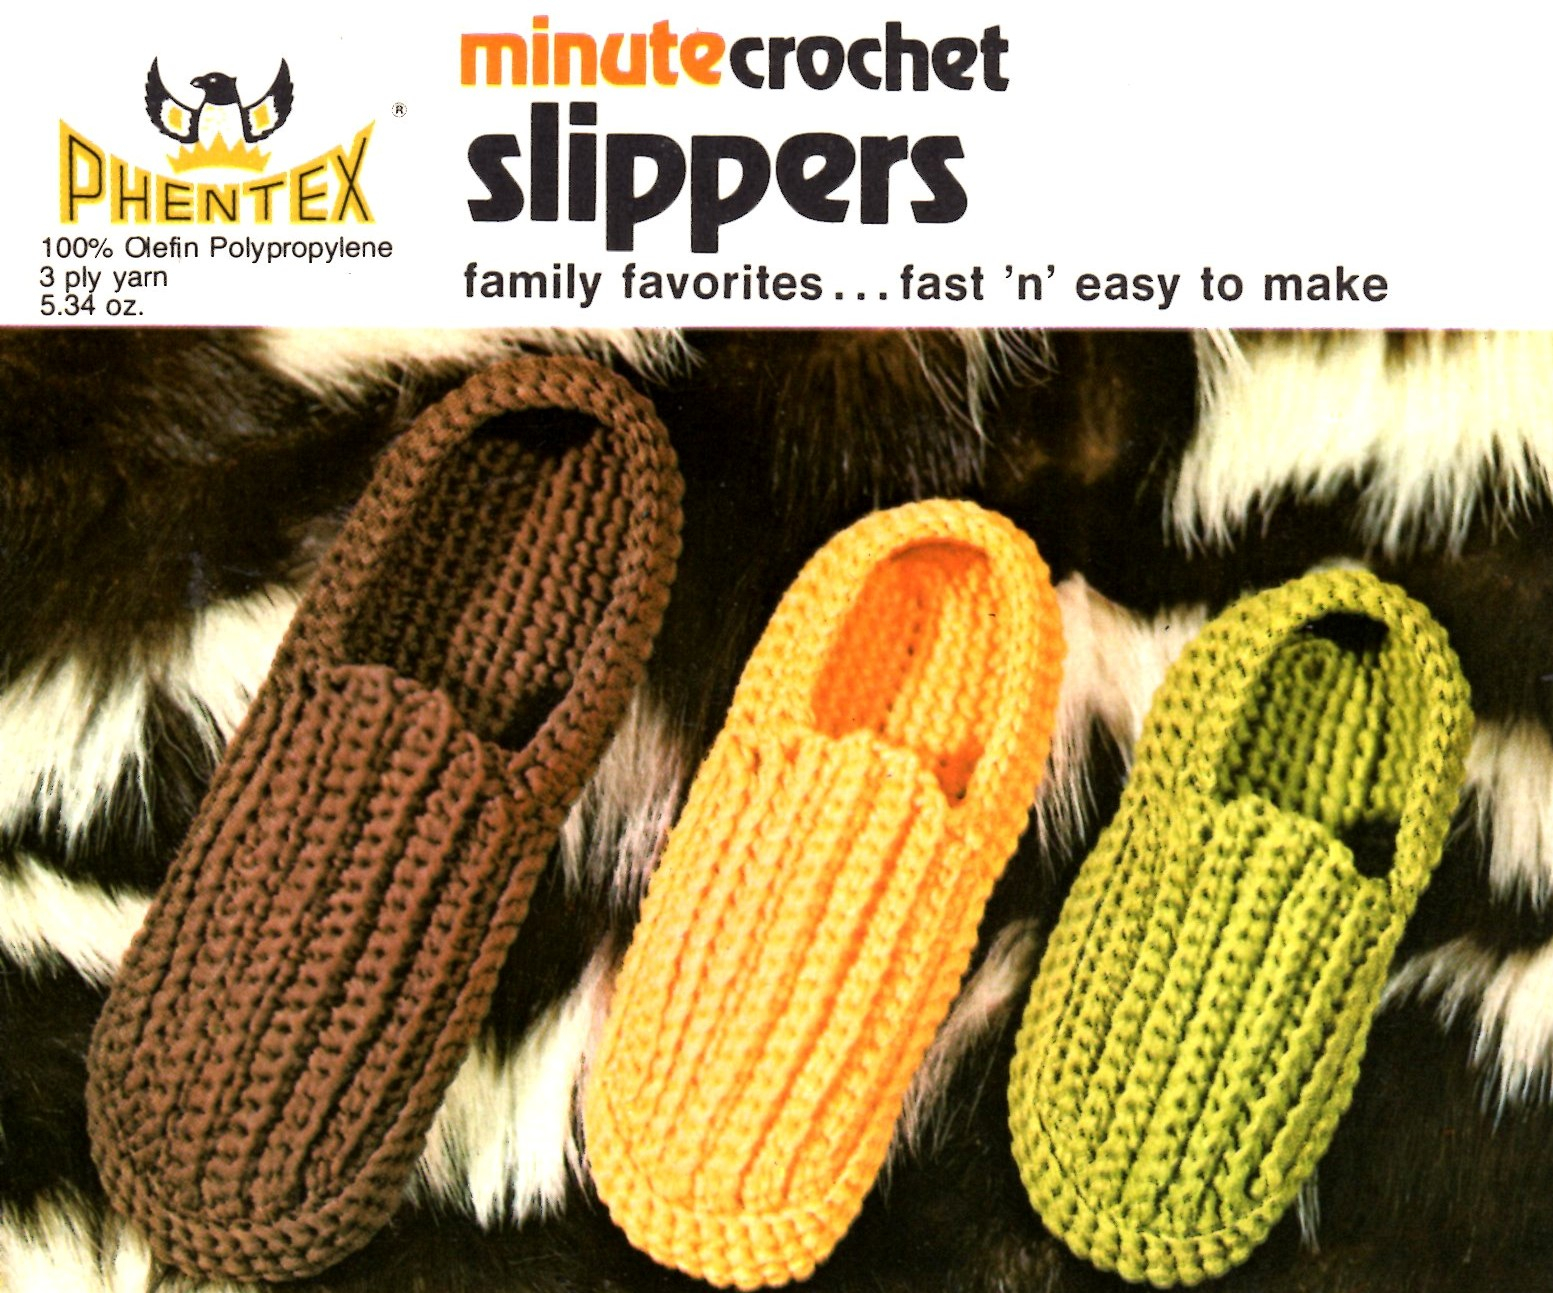 Crochet Slippers Pattern Minute Crochet Slippers For The Whole Family Fast And Easy To Make